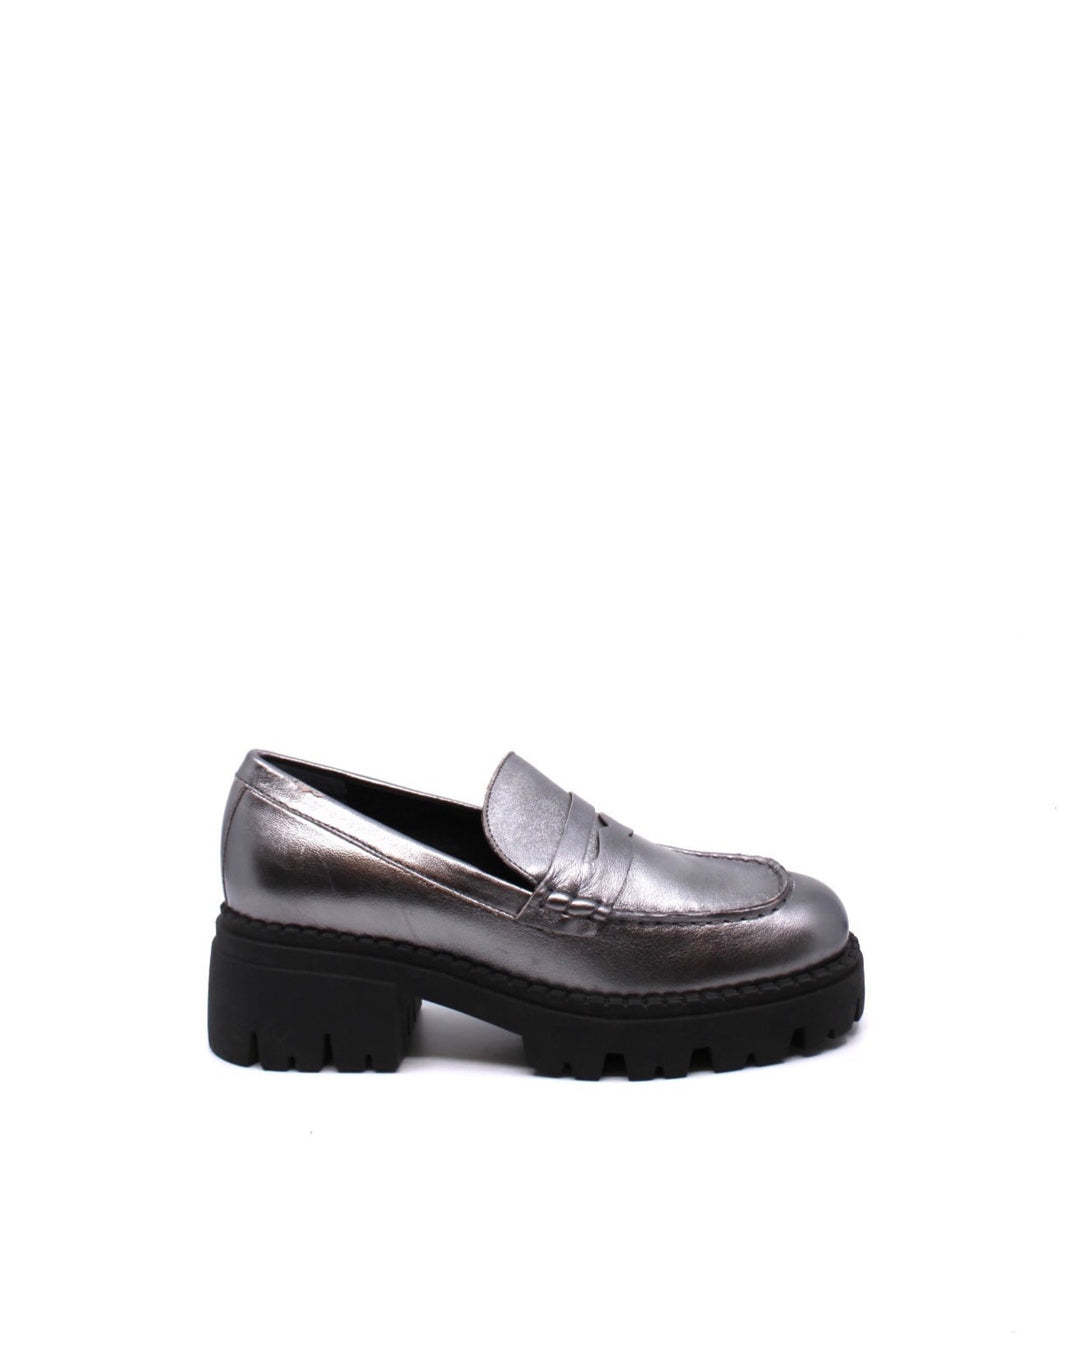 Free People Lyra Lug Sole Loafer Pewter - Dear Lucy